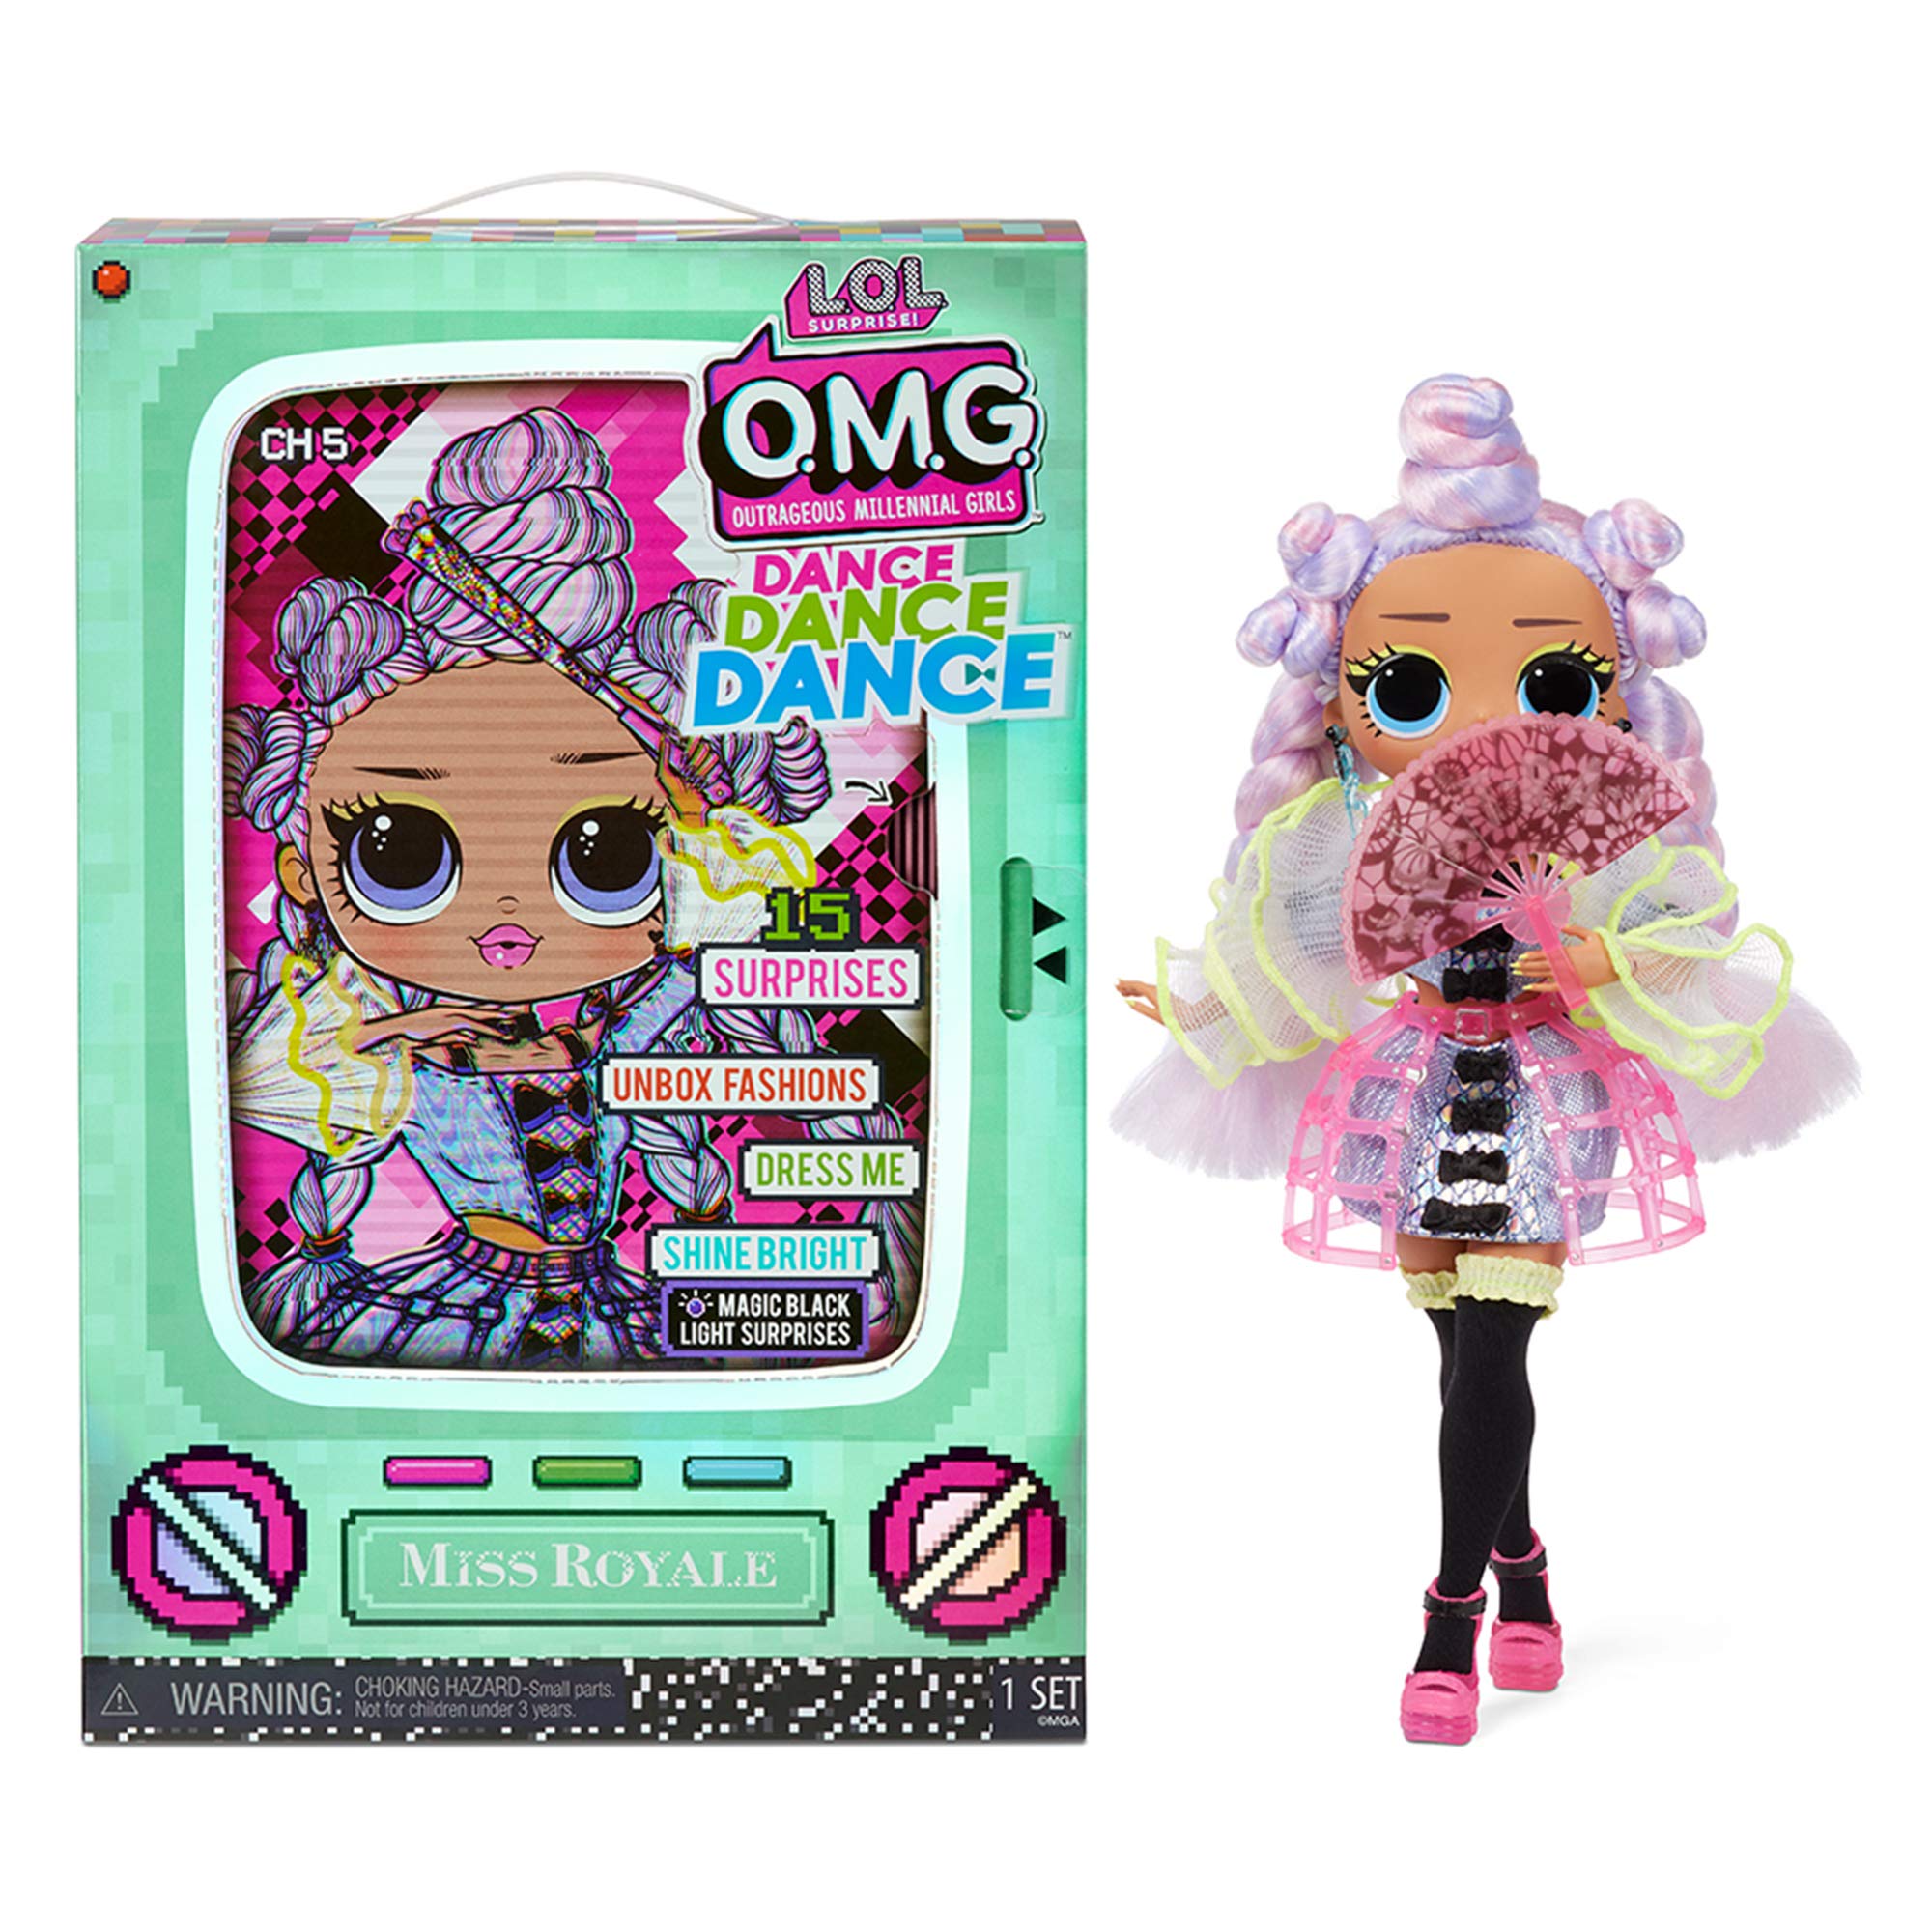 L.O.L. Surprise! OMG Dance Miss Royale Fashion Doll with 15 Surprises Including Magic Black Light, Shoes, Hair Brush, Doll Stand and TV Package - Great Gift for Girls Ages 4+